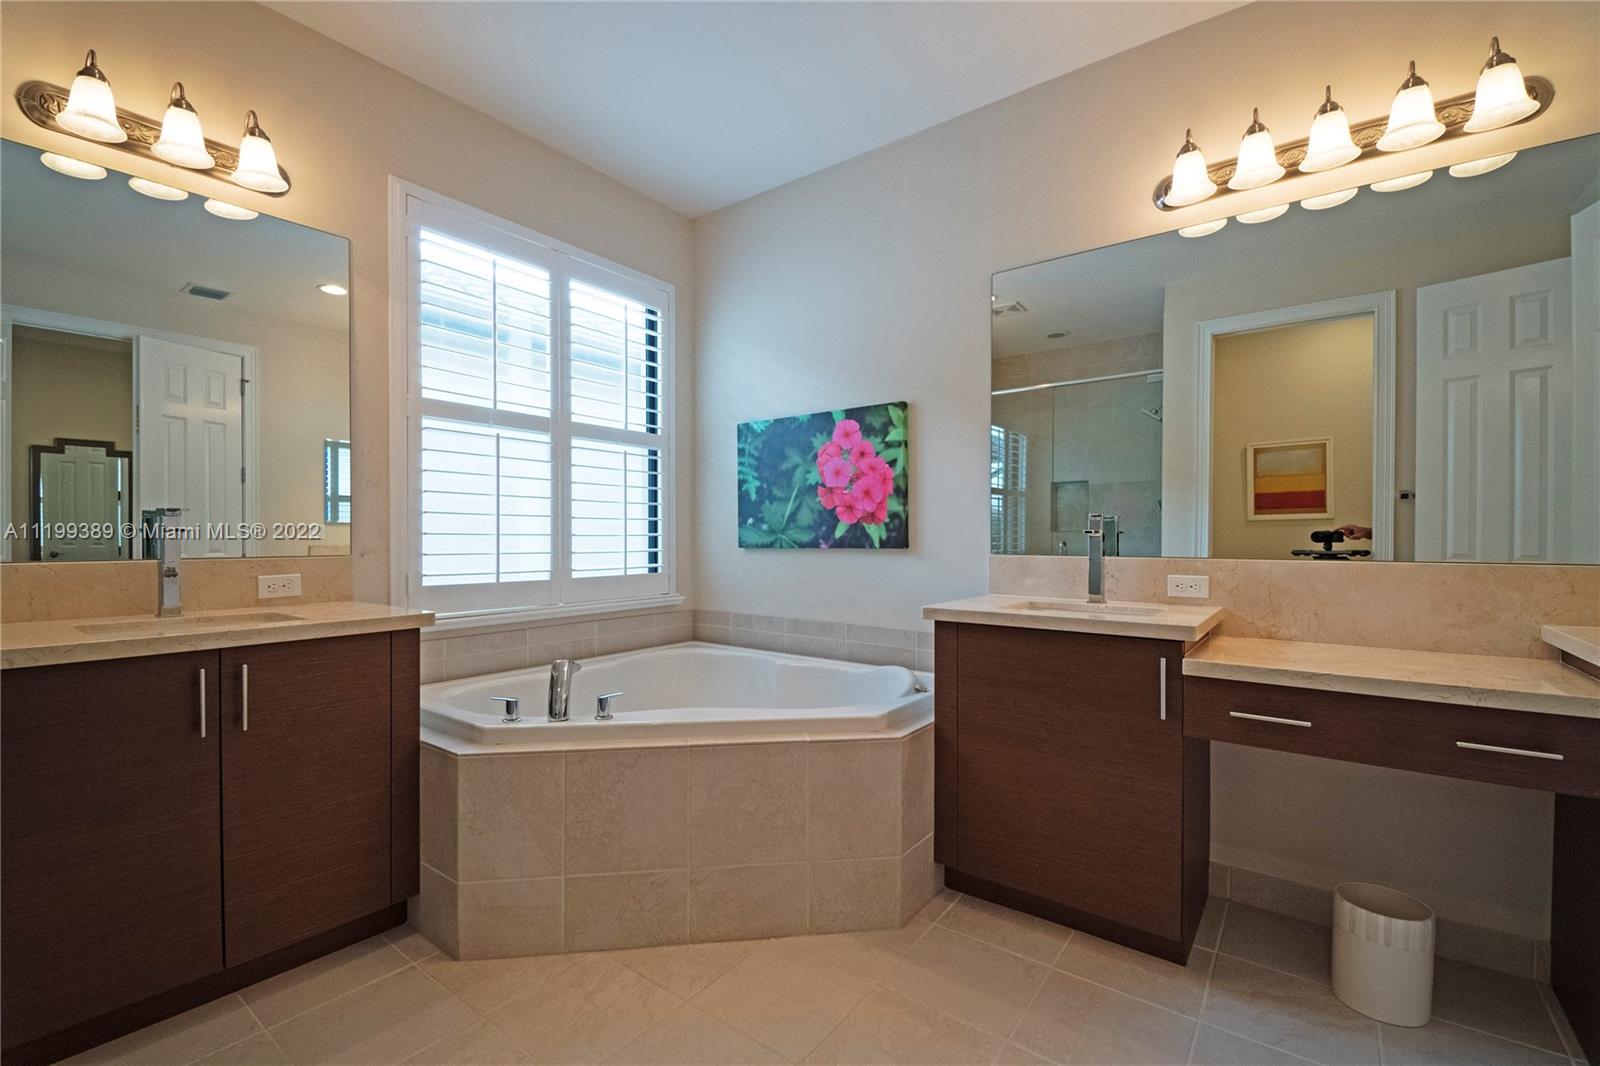 Master Bathroom with double sinks, jacuzzi bathtub, makeup counter/lights, lots of cabinetry